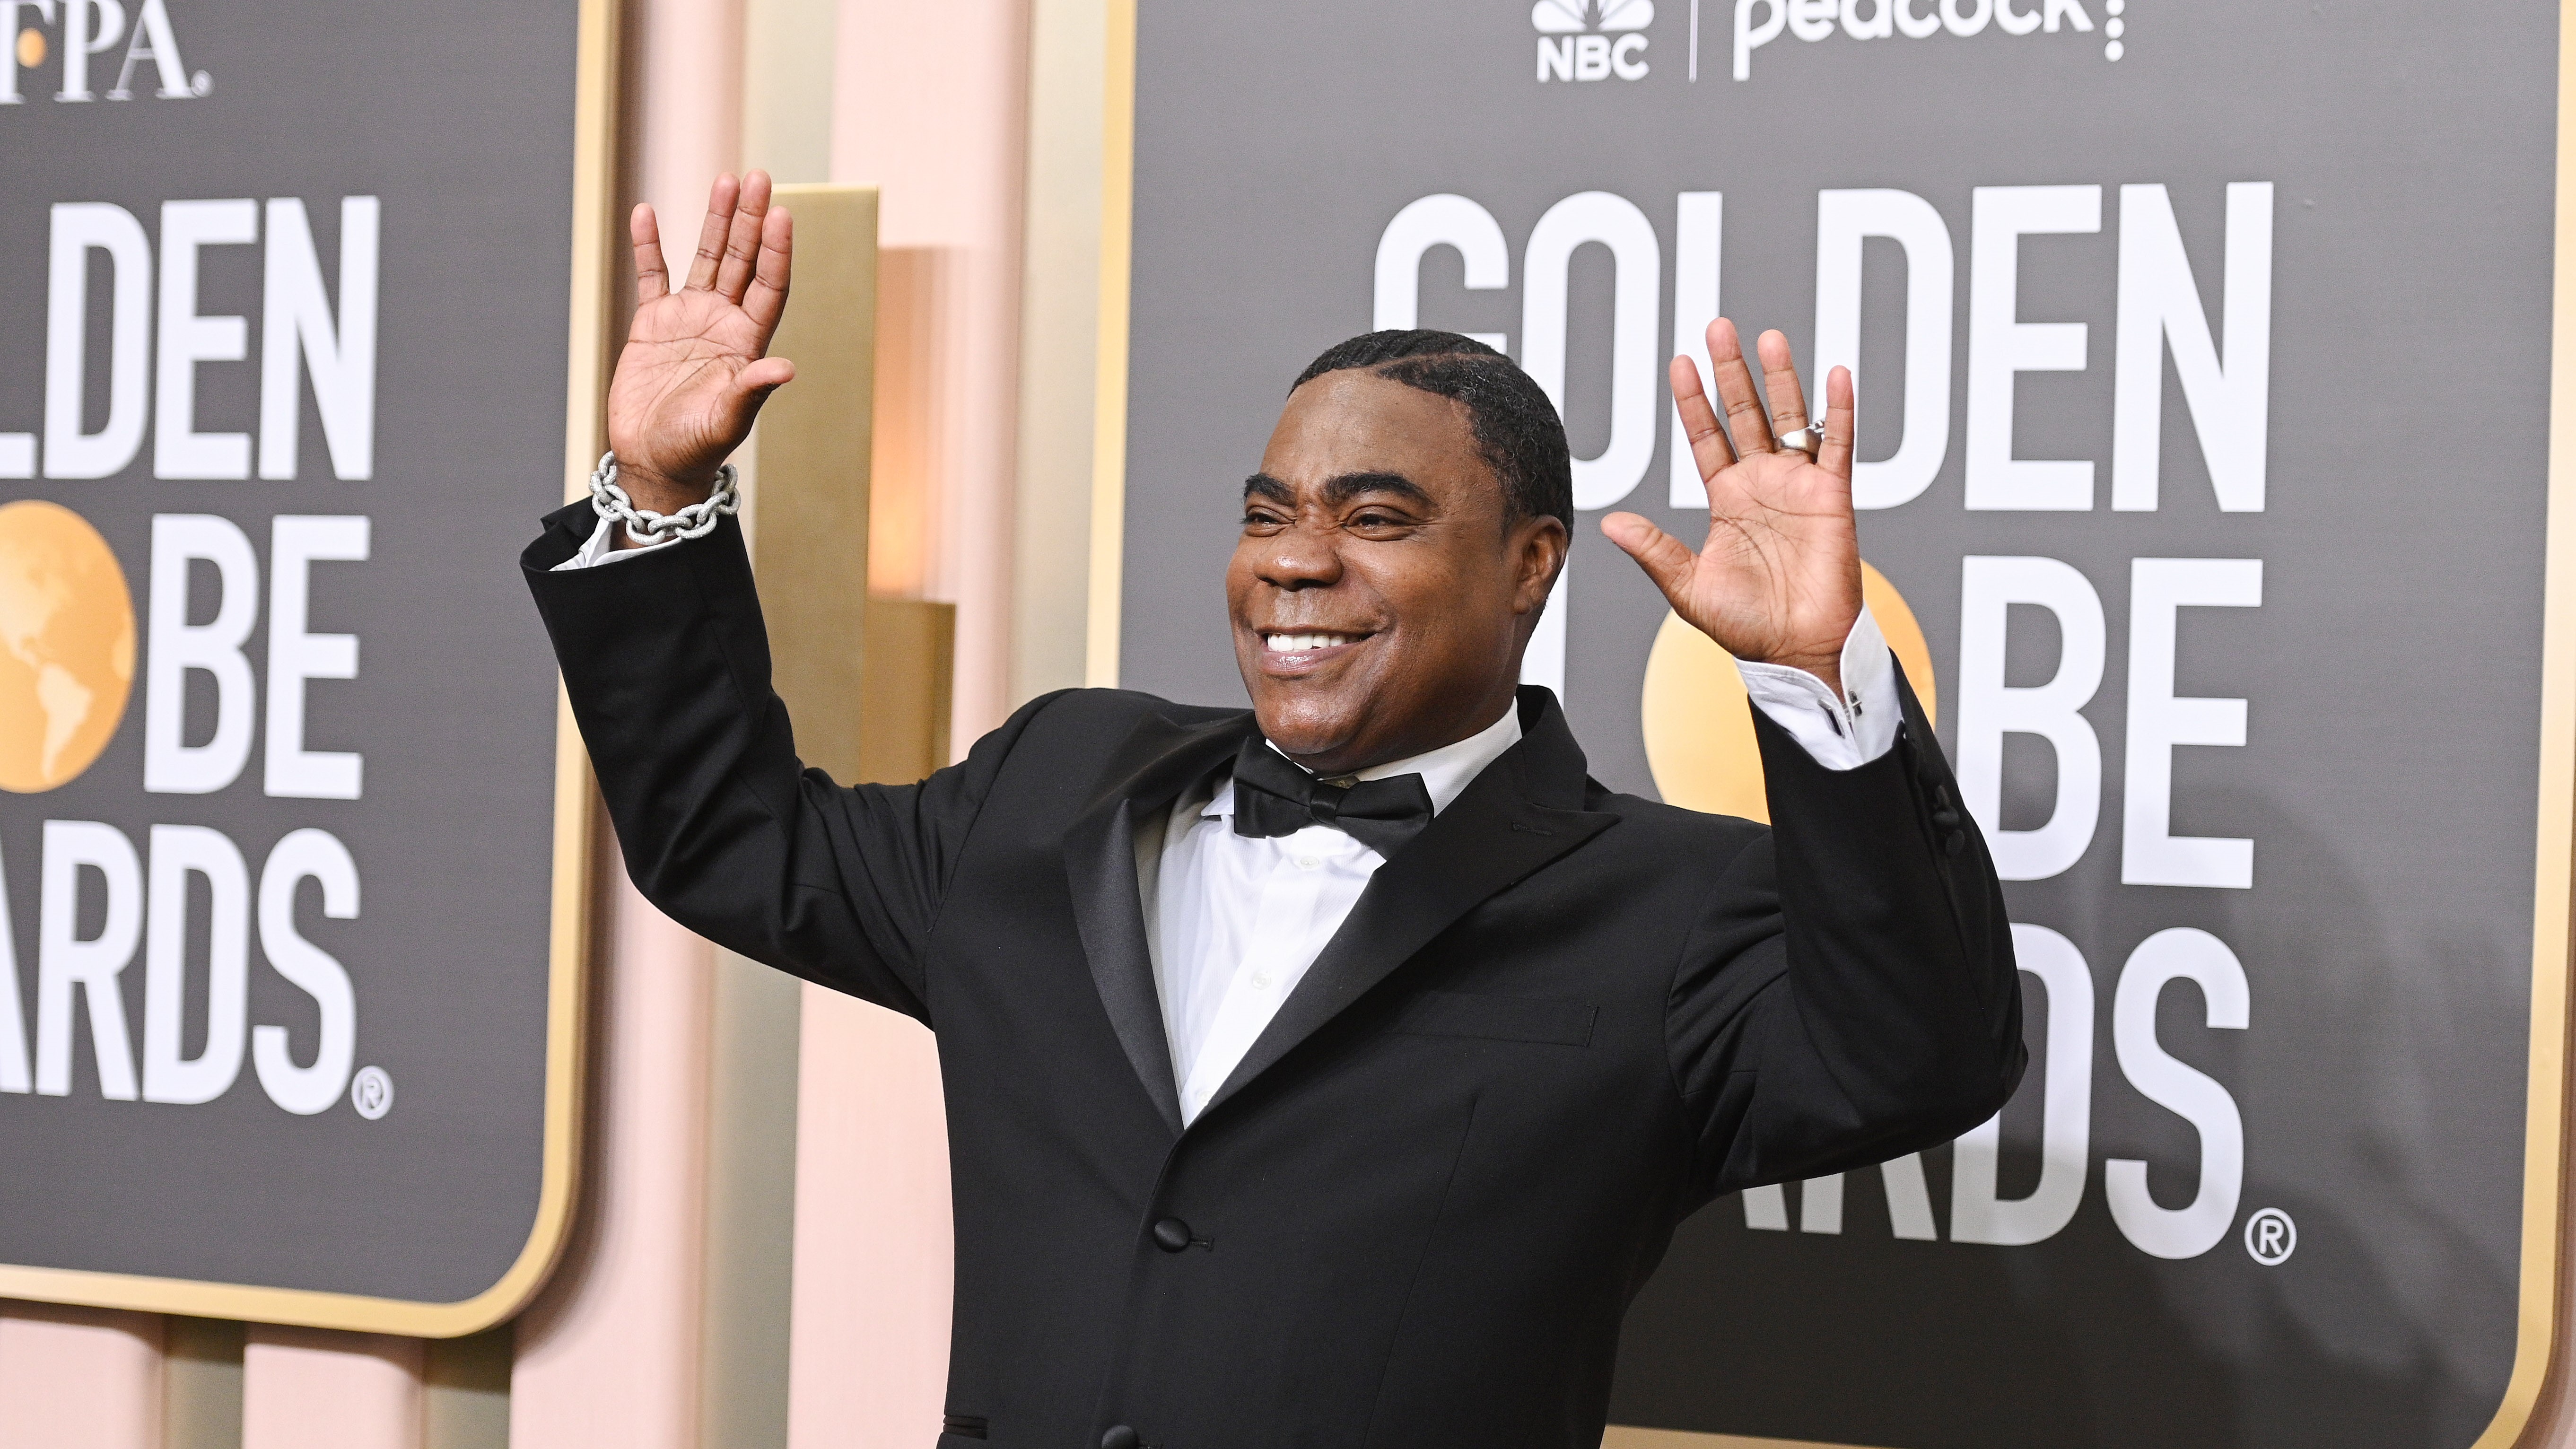 Tracy Morgan on the Golden Globes red carpet